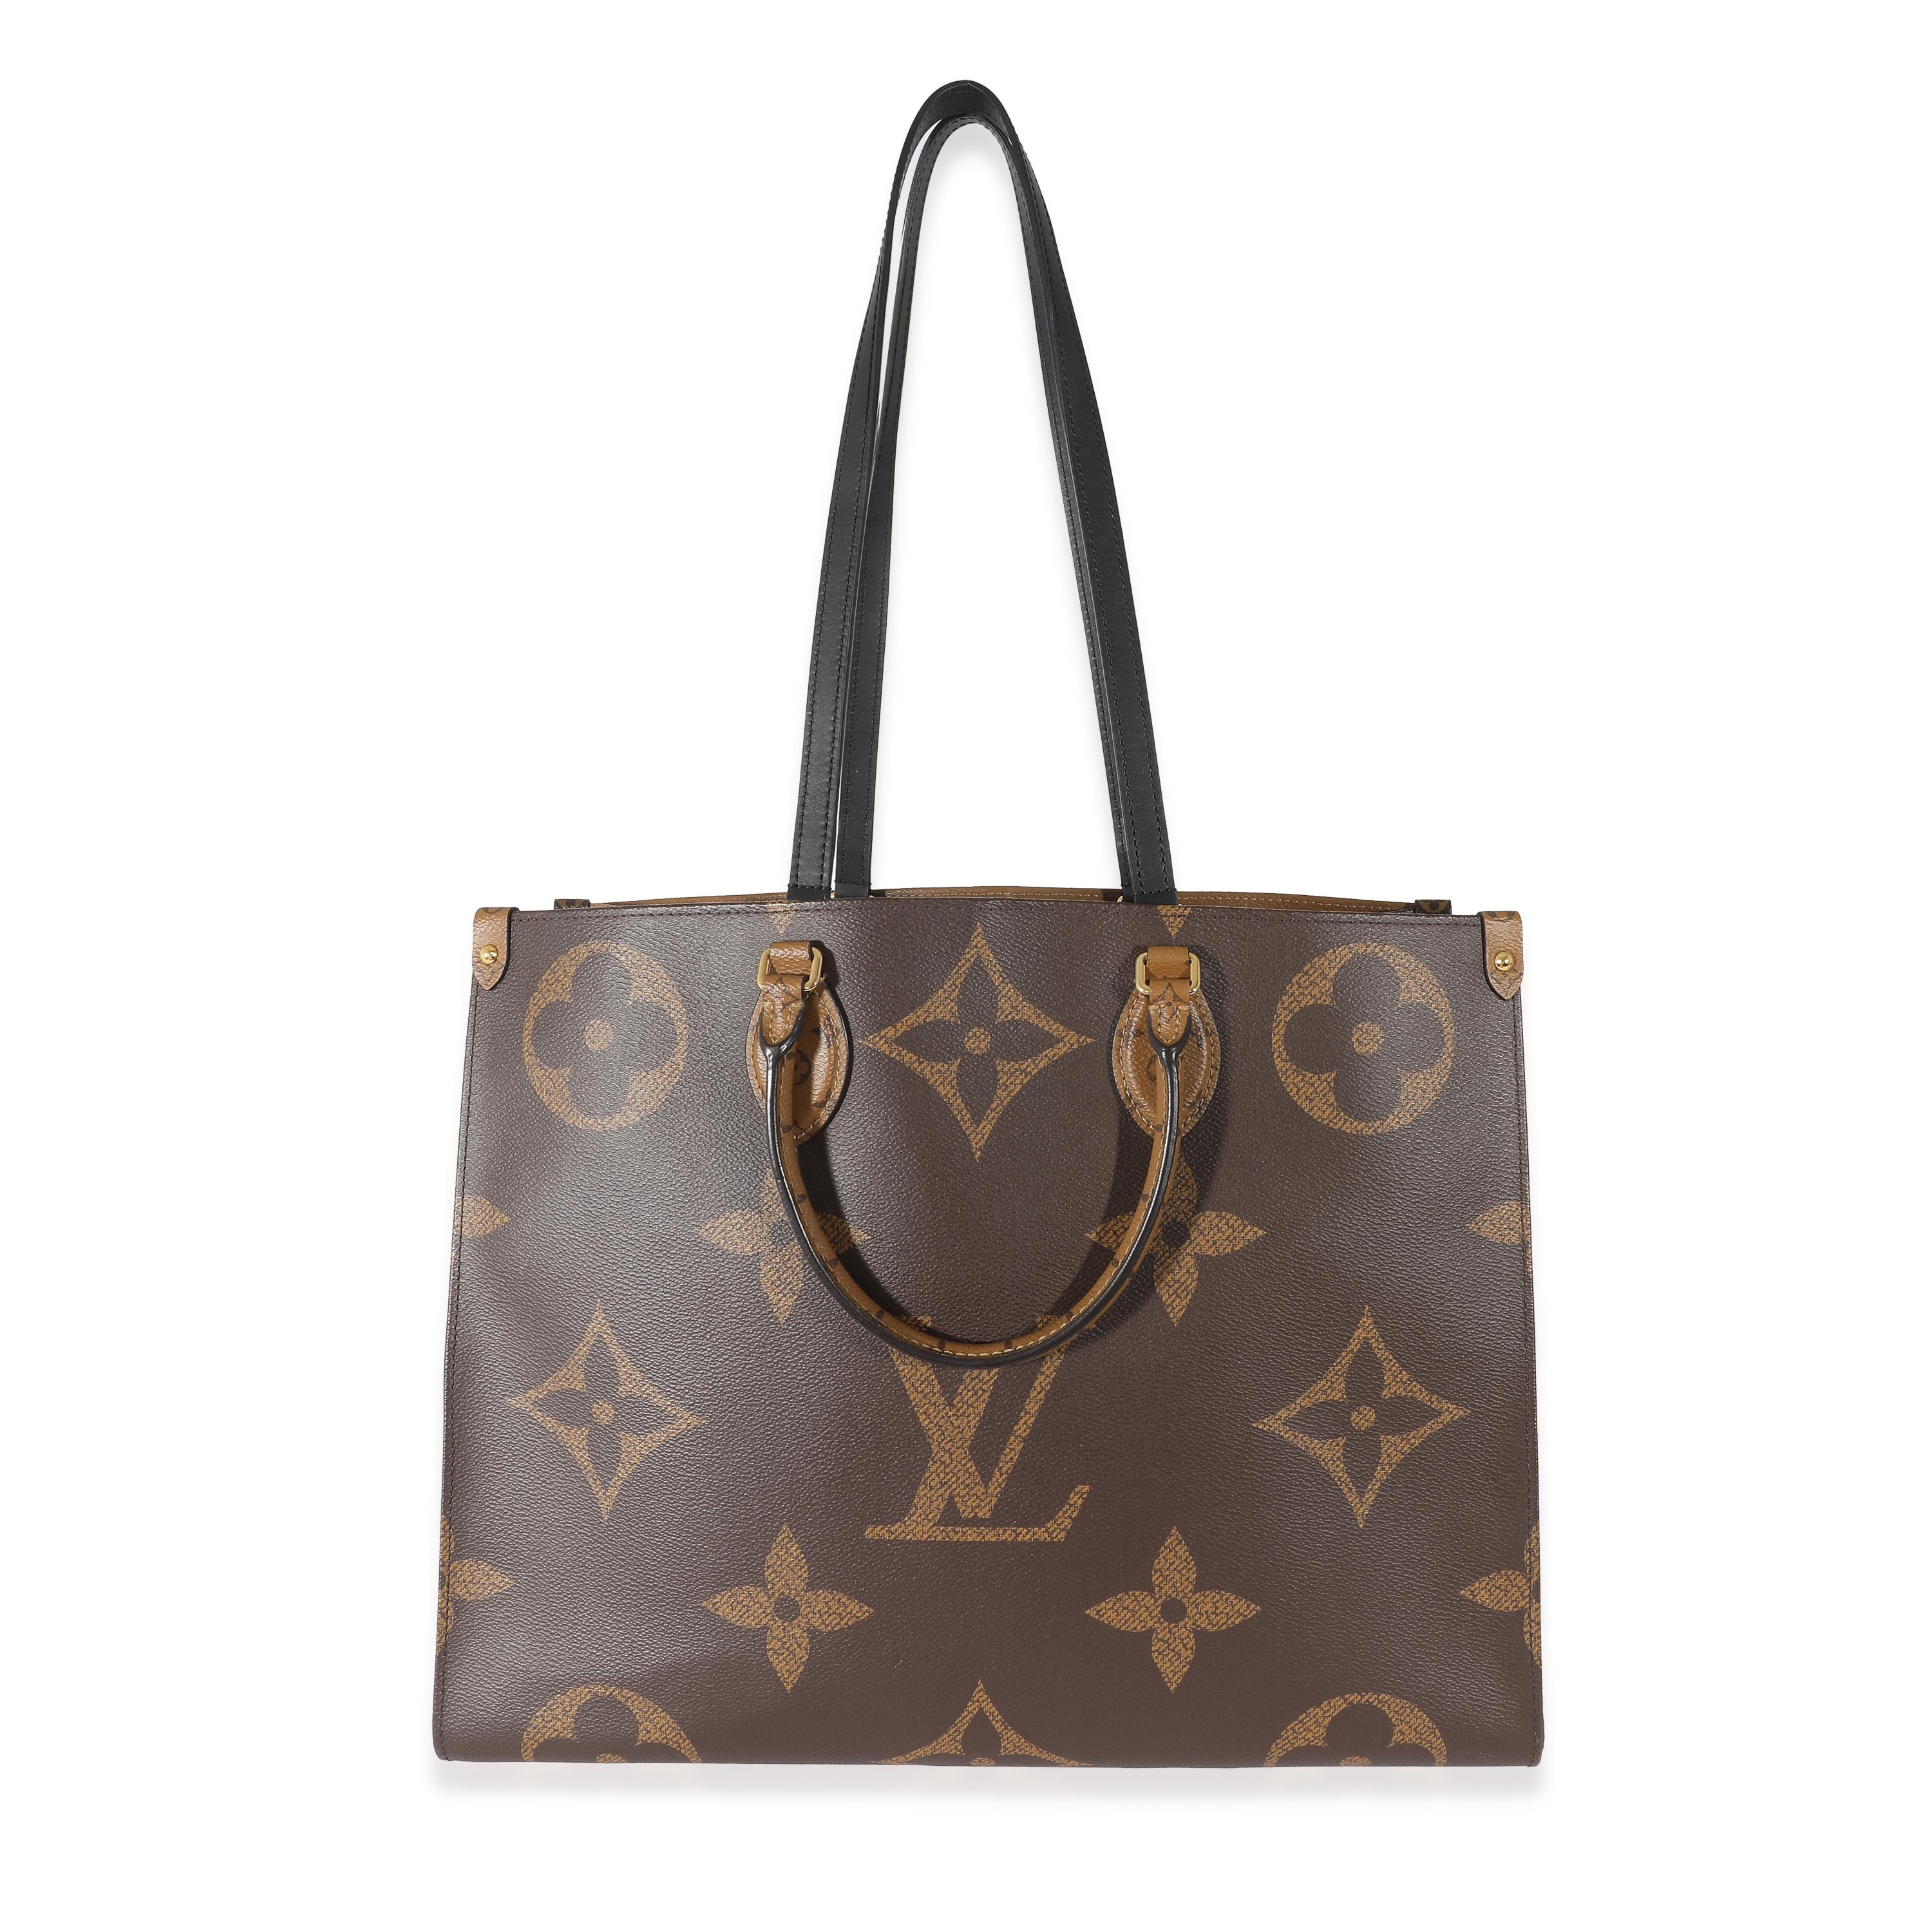 Listing Title: Louis Vuitton Giant Monogram Reverse Canvas Onthego GM
SKU: 133361
MSRP: 3250.00 USD
Condition: Pre-owned 
Handbag Condition: Good
Condition Comments: Item is in good condition with apparent signs of wear. Exterior corner scuffing and